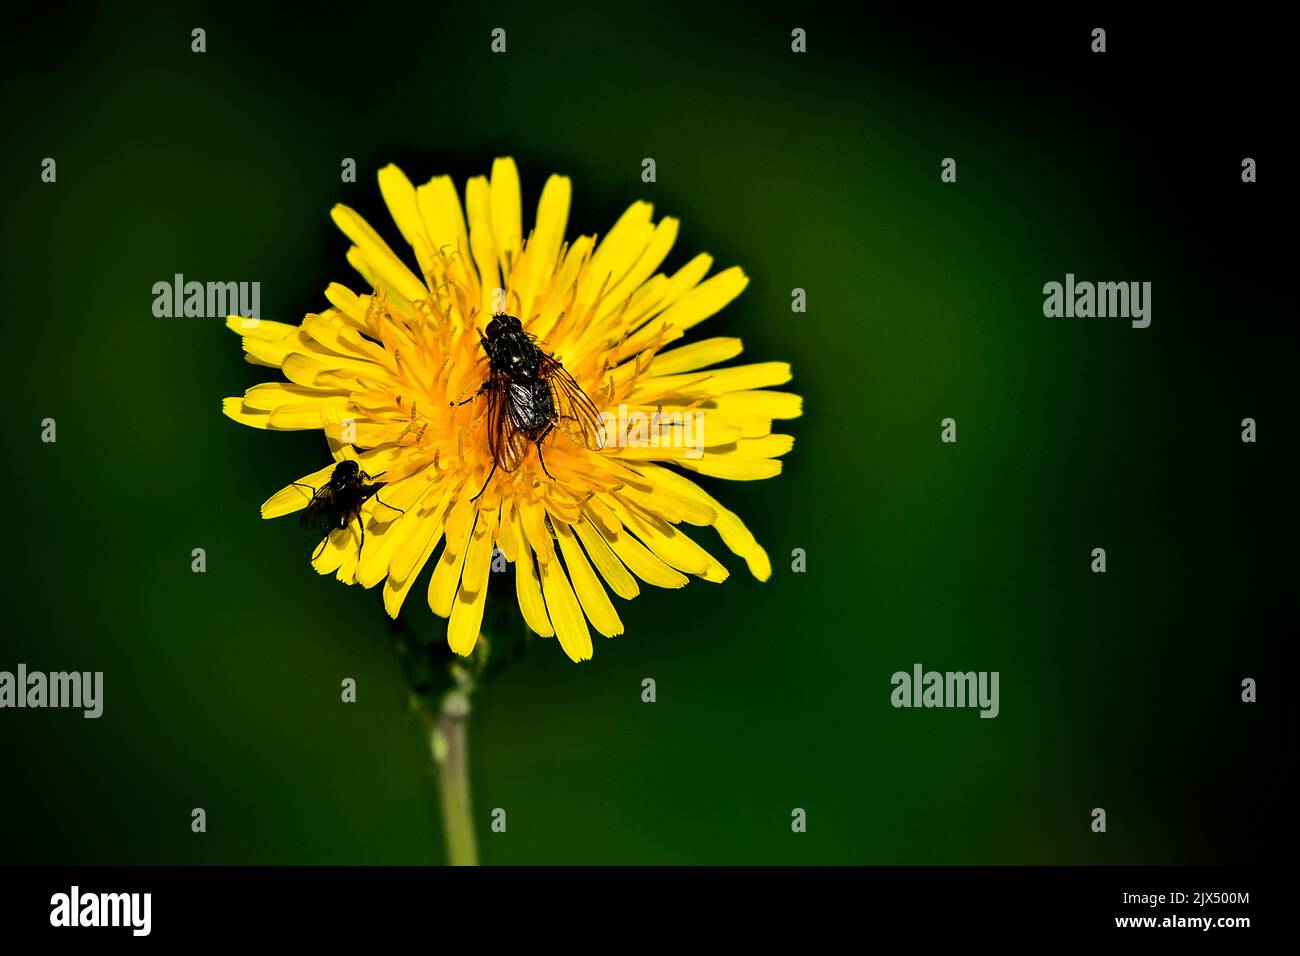 Fly insect on a wild dandelion plant. Stock Photo